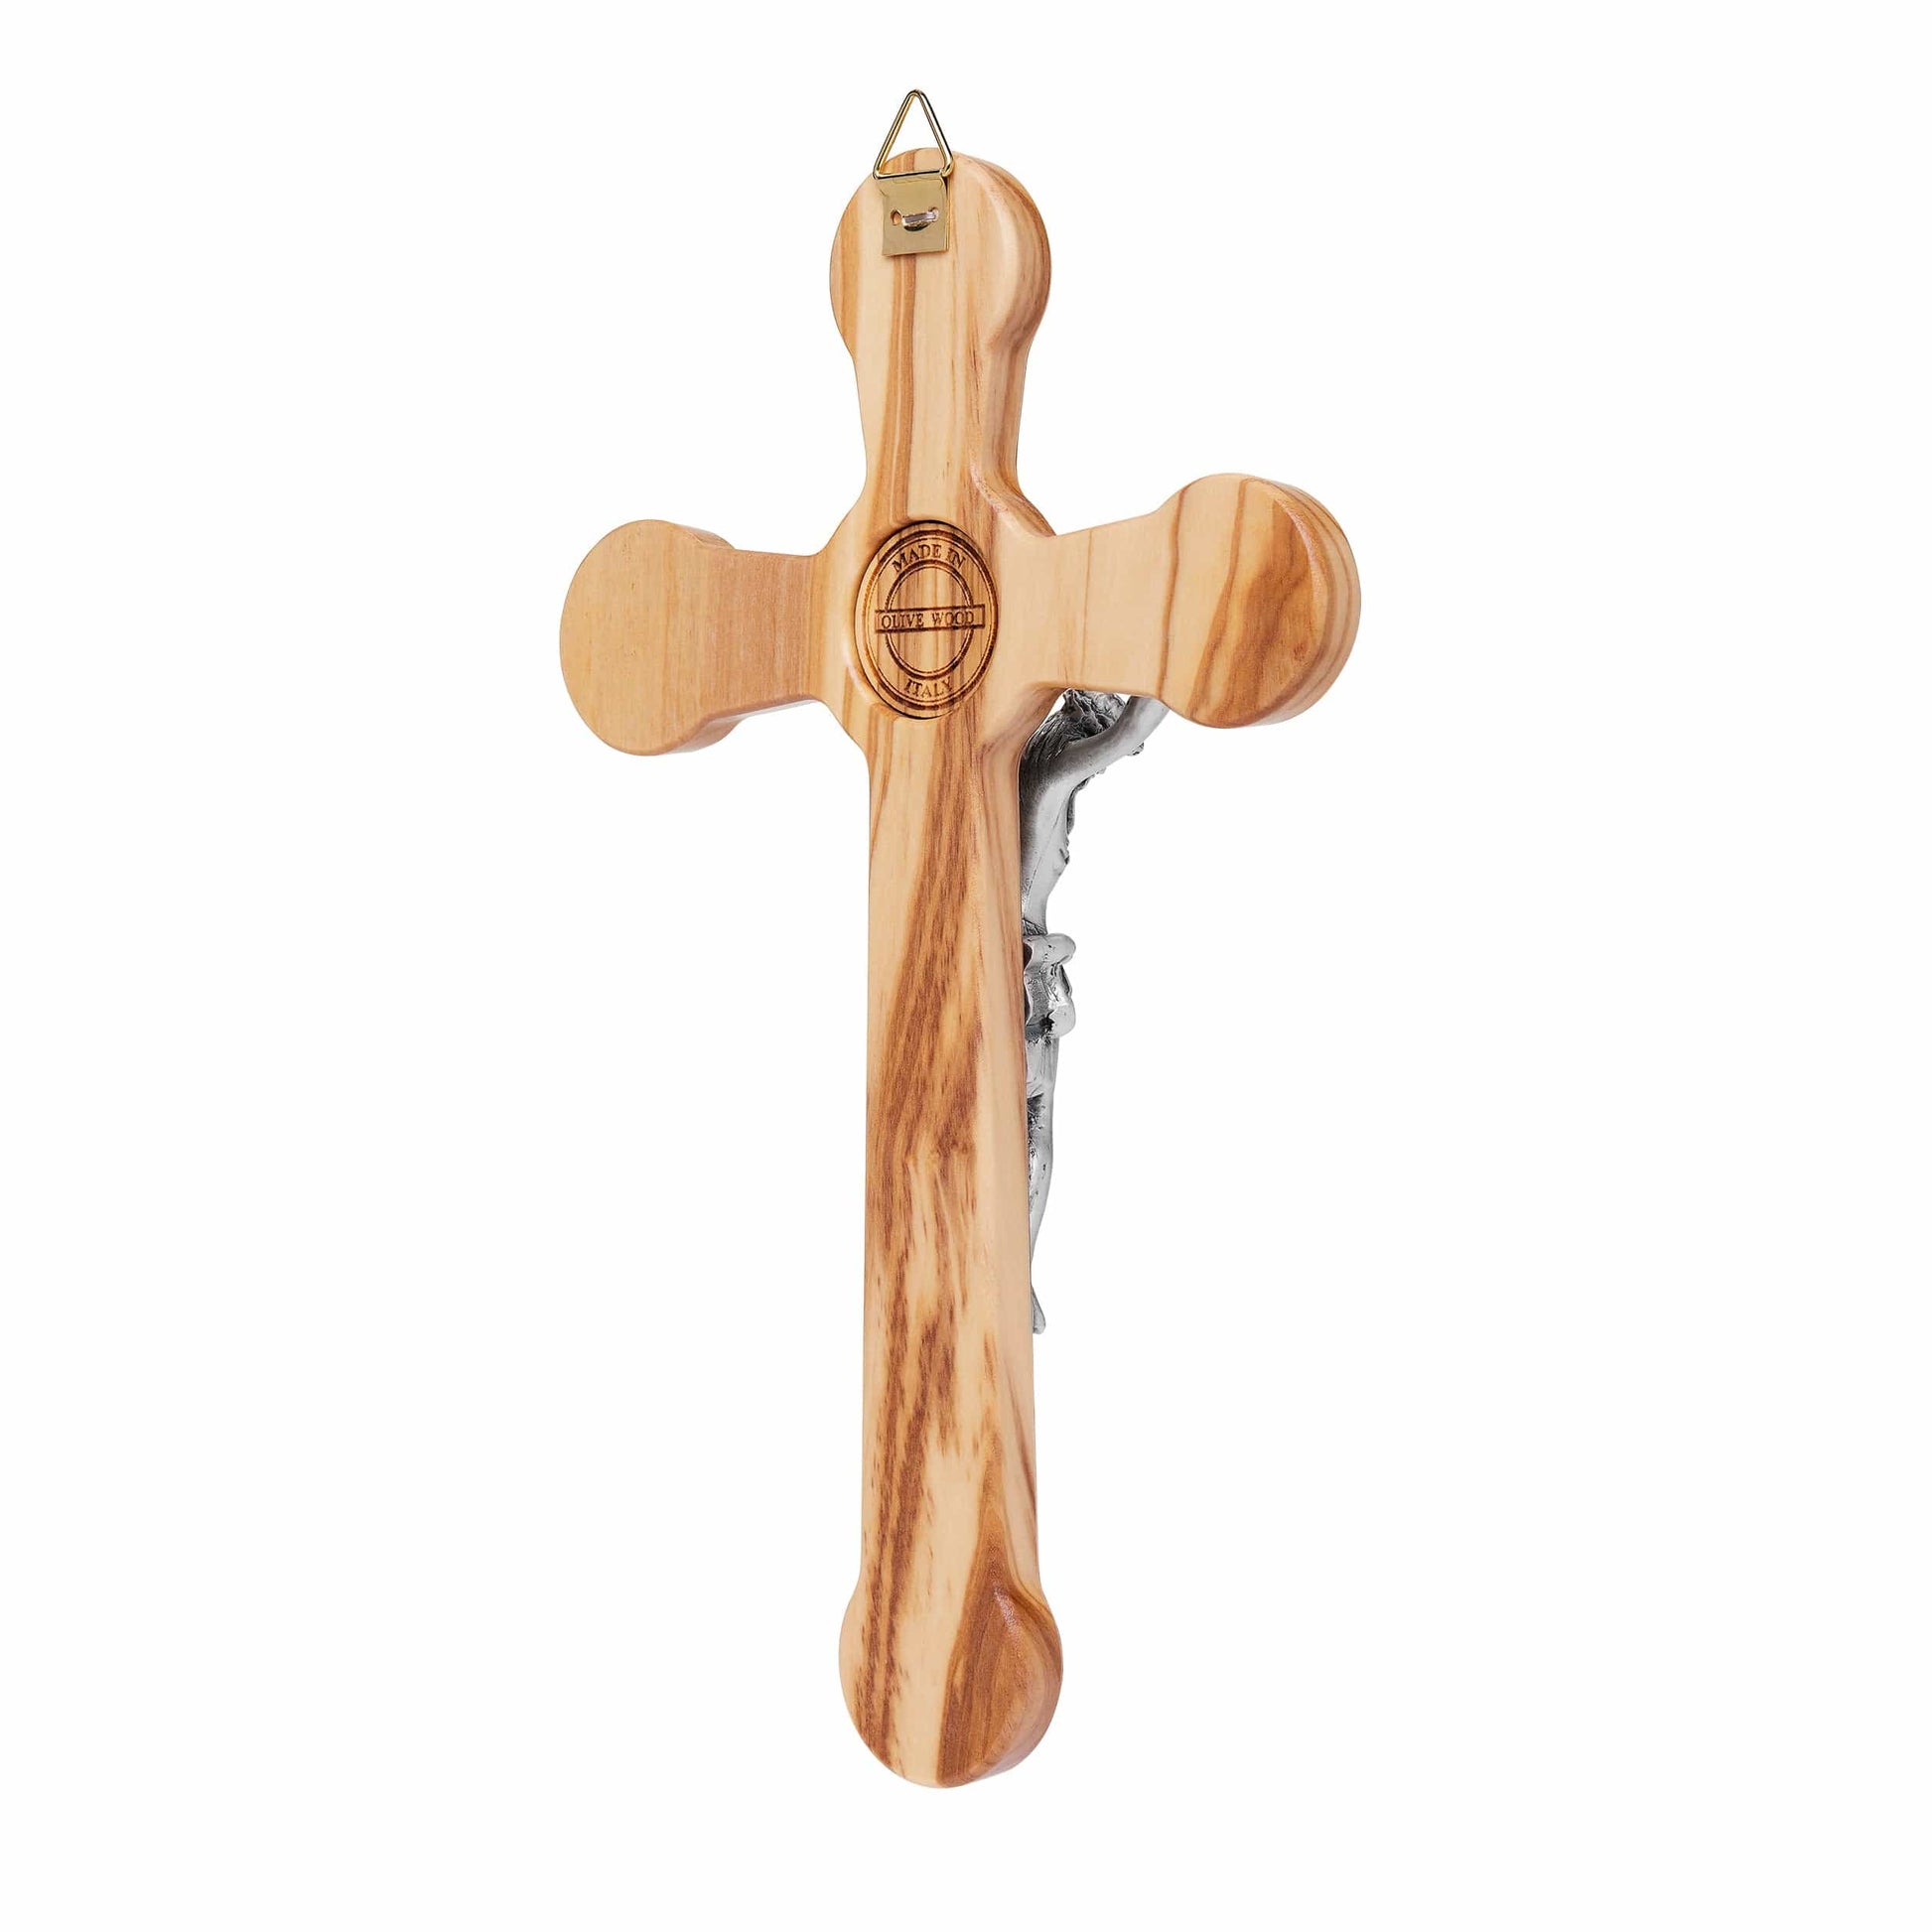 MONDO CATTOLICO 20 cm (7.84 in) Olive Wood Crucifix With Crown of Thorns and the Four Roman Basilicas Medals